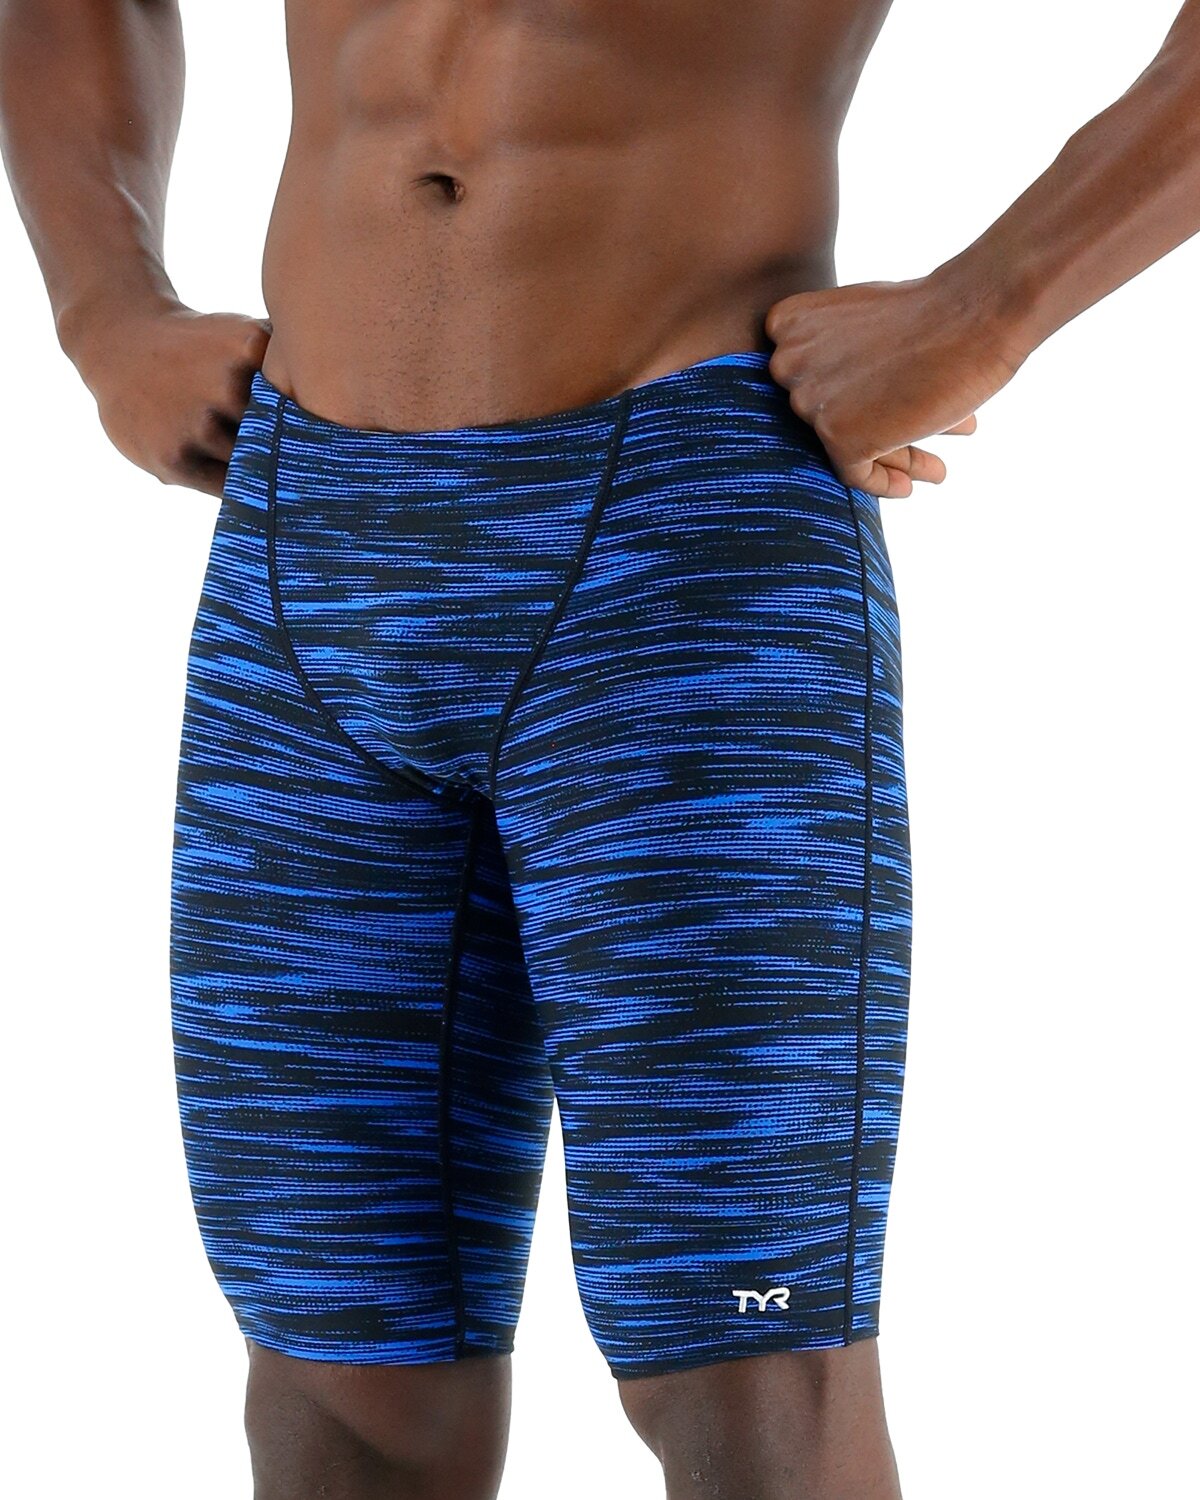 TYR Blue Fizzy Jammer Size 28